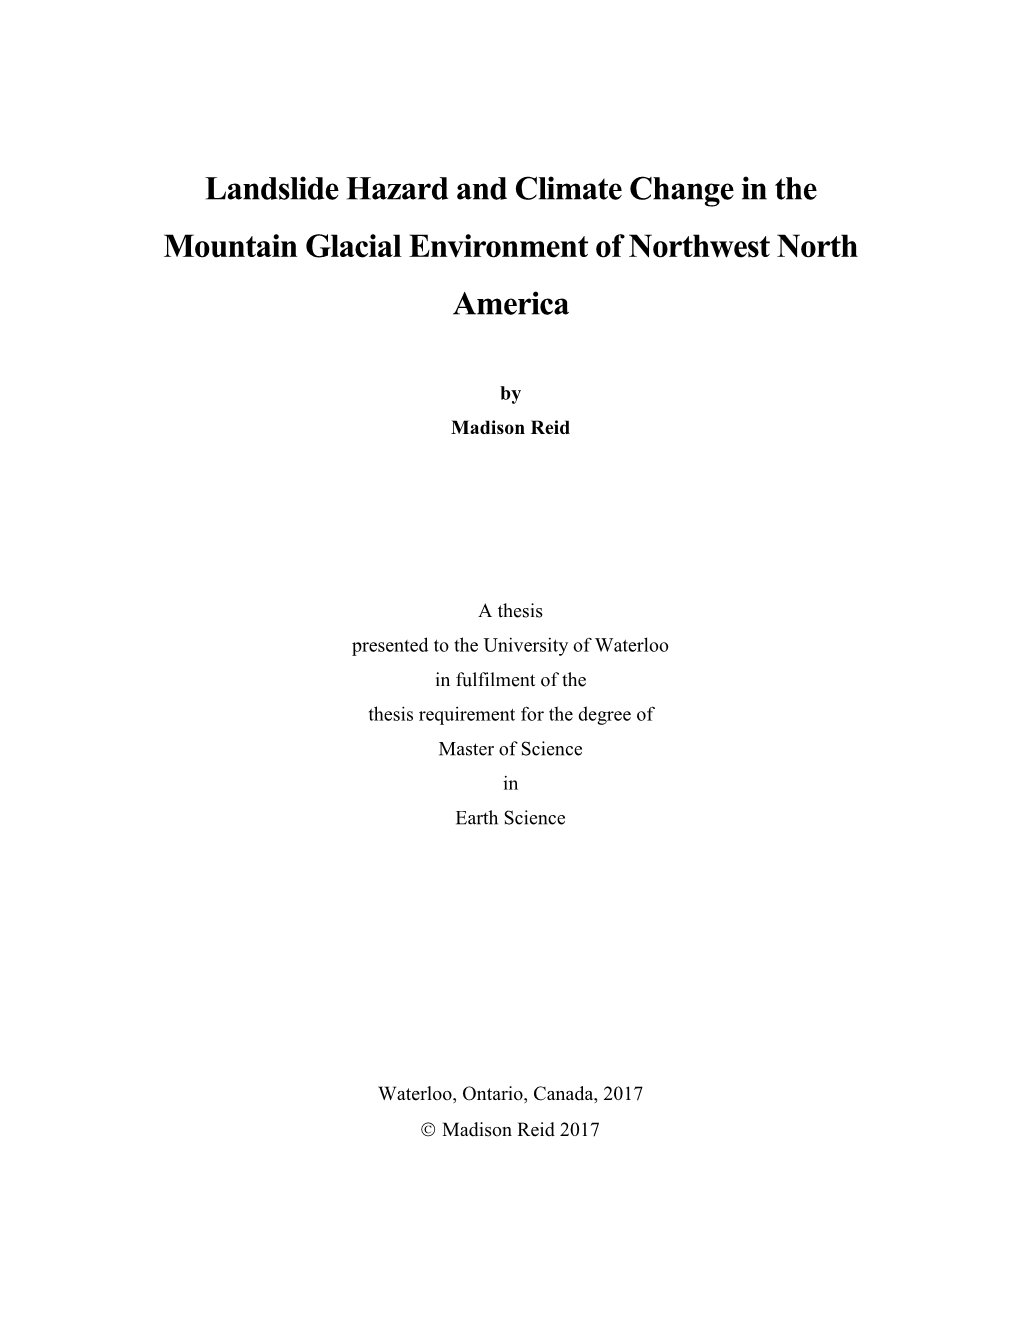 Landslide Hazard and Climate Change in the Mountain Glacial Environment of Northwest North America